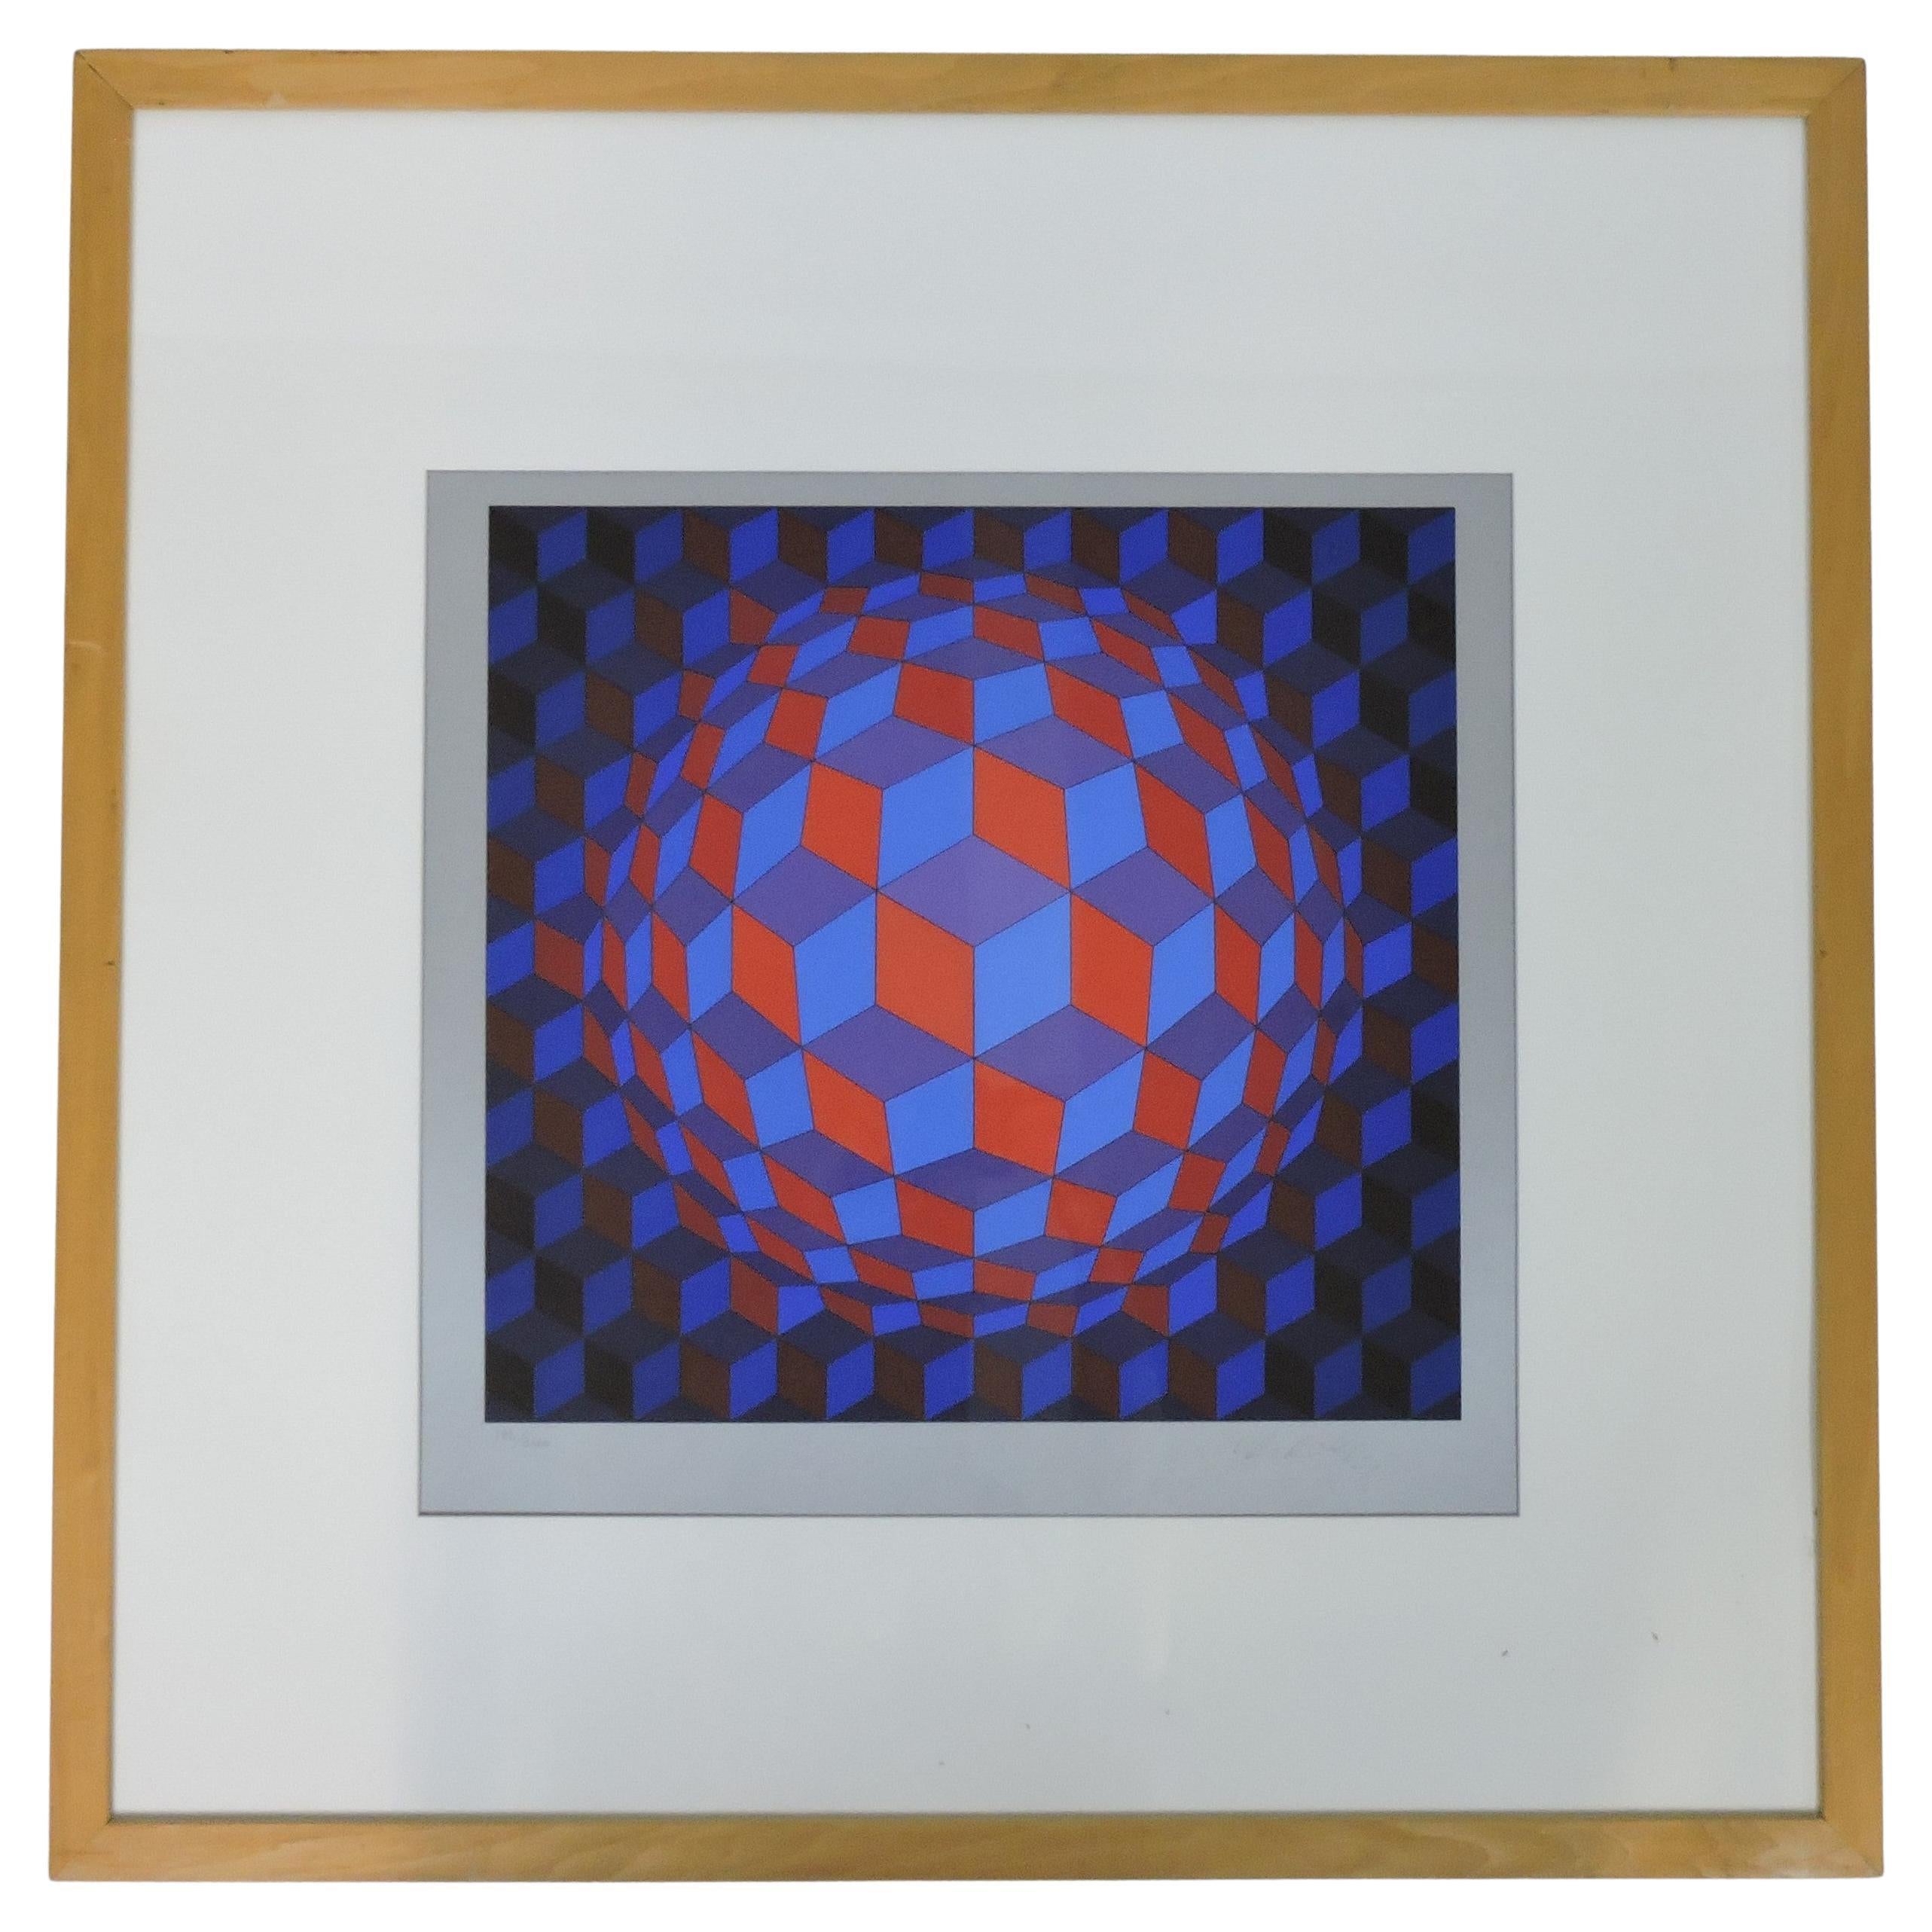 Victor Vasarely Op Art Signed and Numbered Screen Print